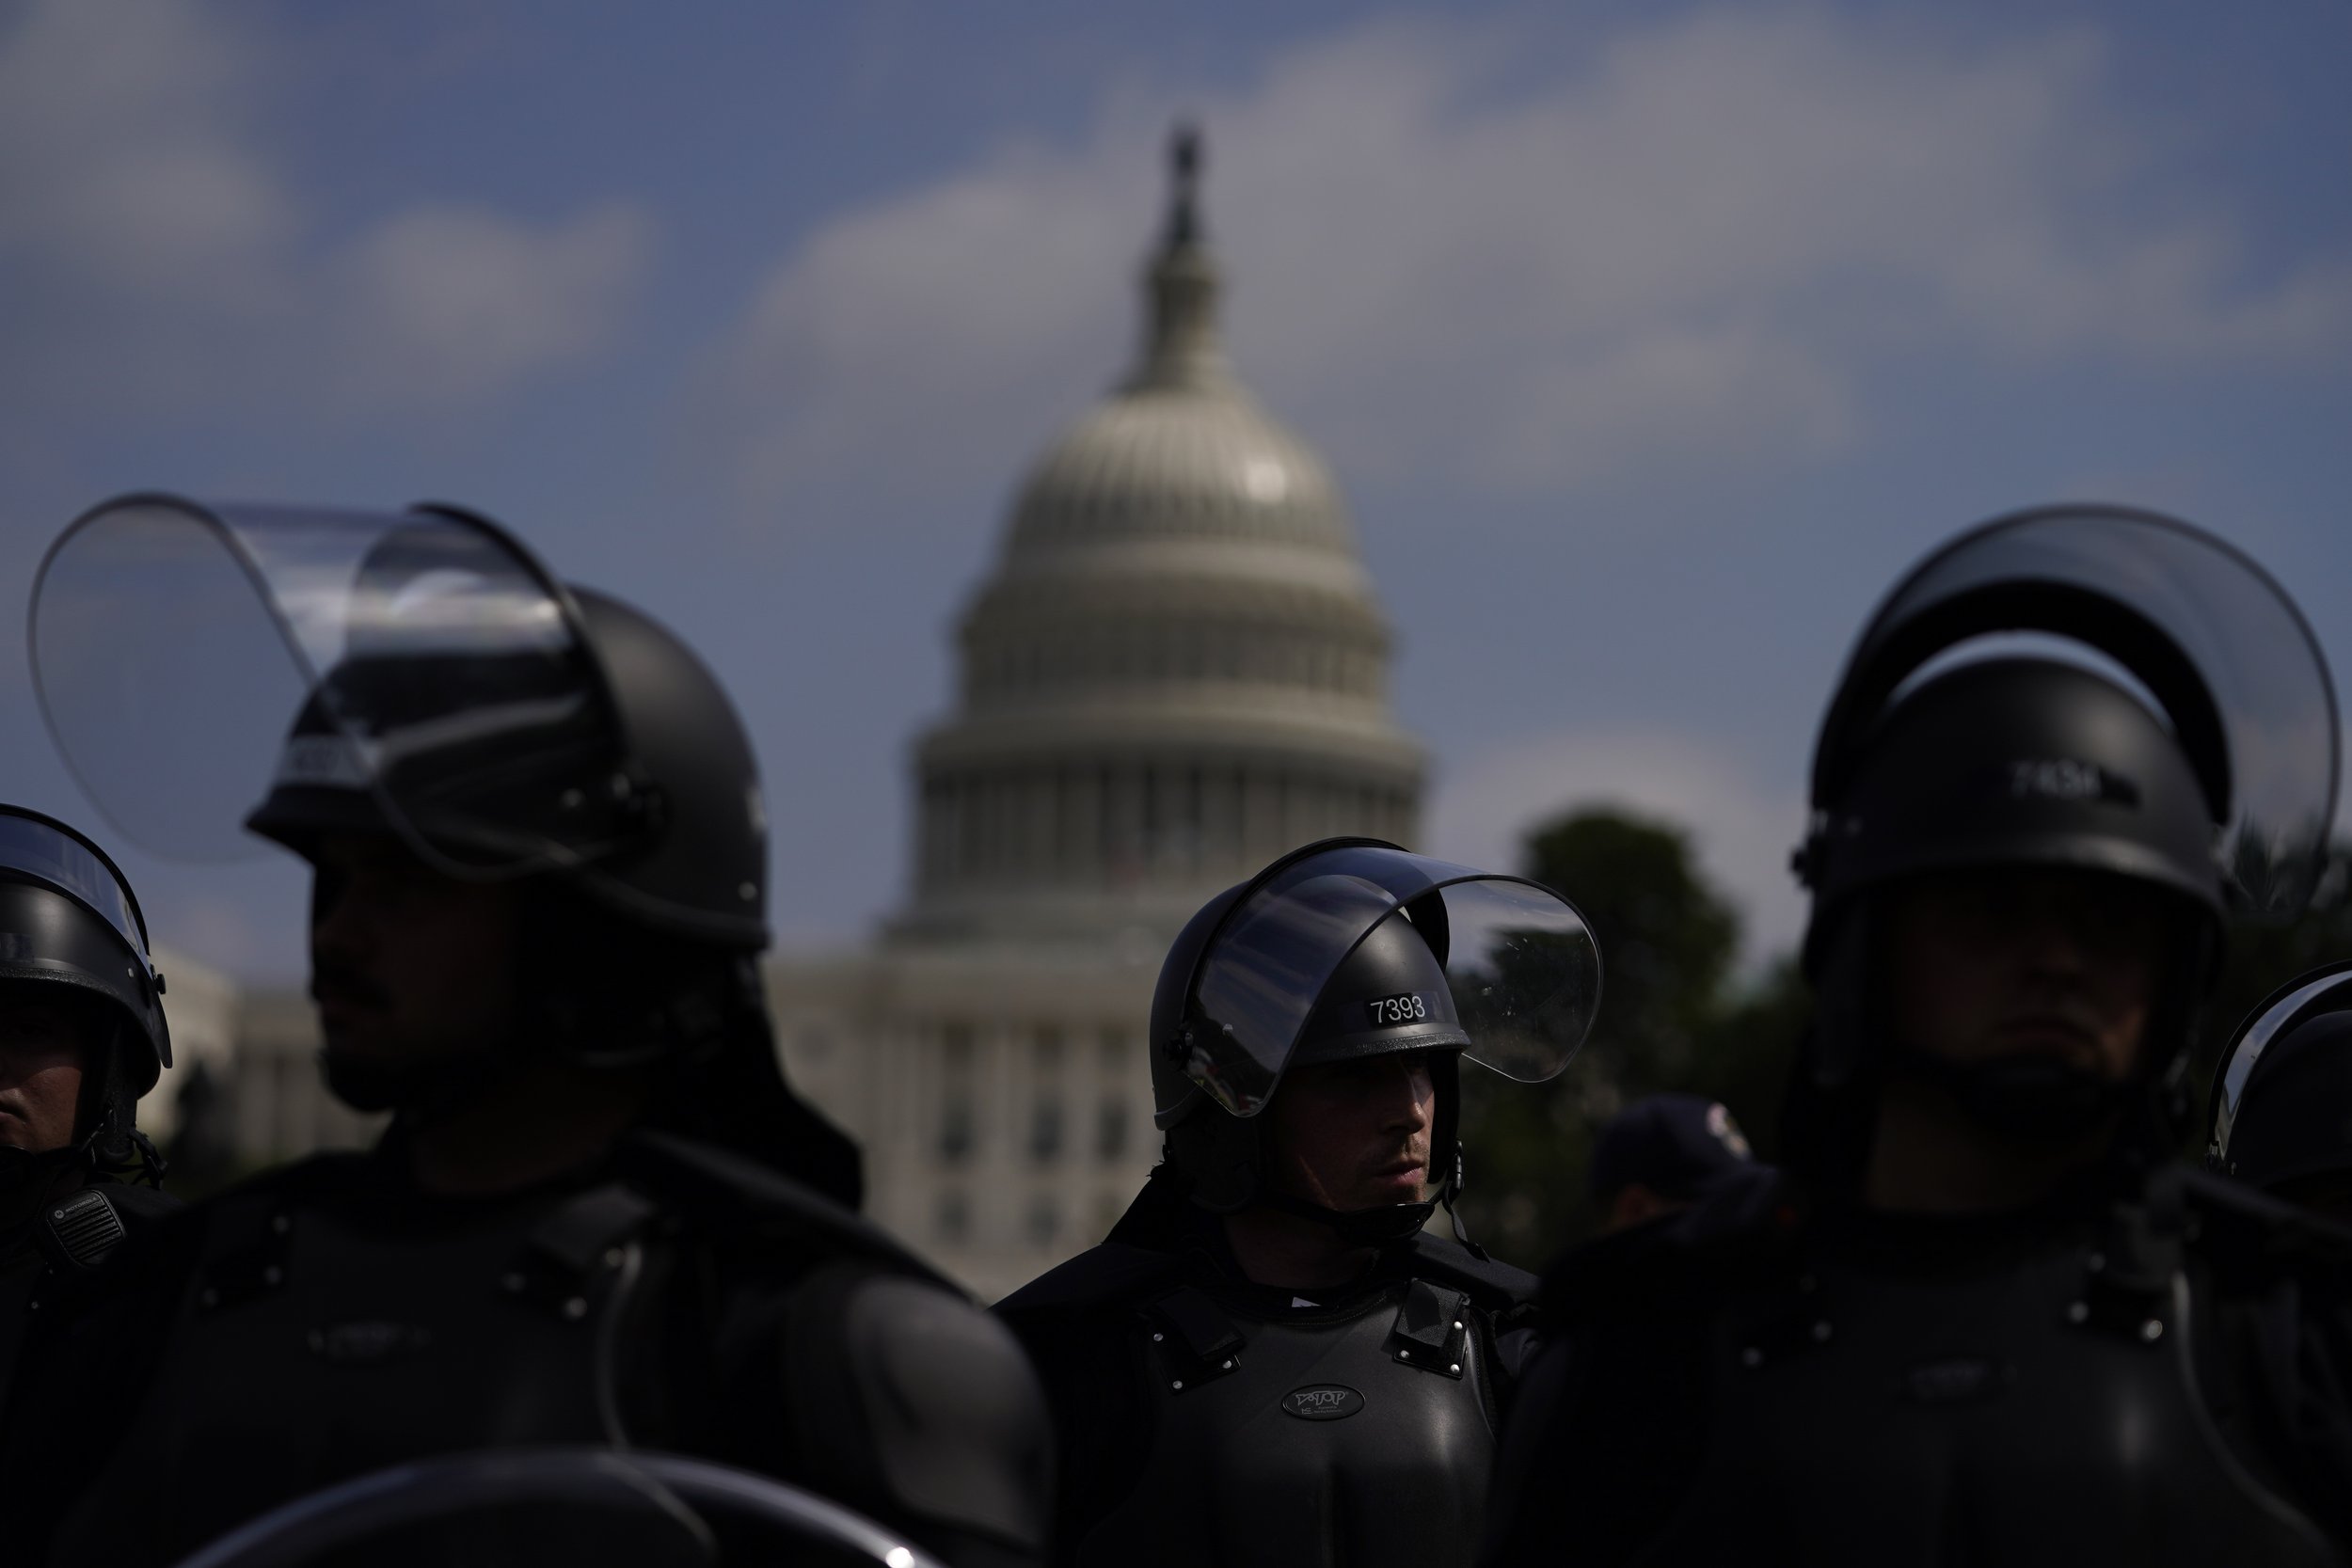  Police in riot gear patrol near the U.S. Capitol in Washington, on Sept. 18, 2021, during a rally by allies of former President Donald Trump to support what they call “political prisoners” from the Jan. 6 insurrection at the U.S. Capitol. (AP Photo/